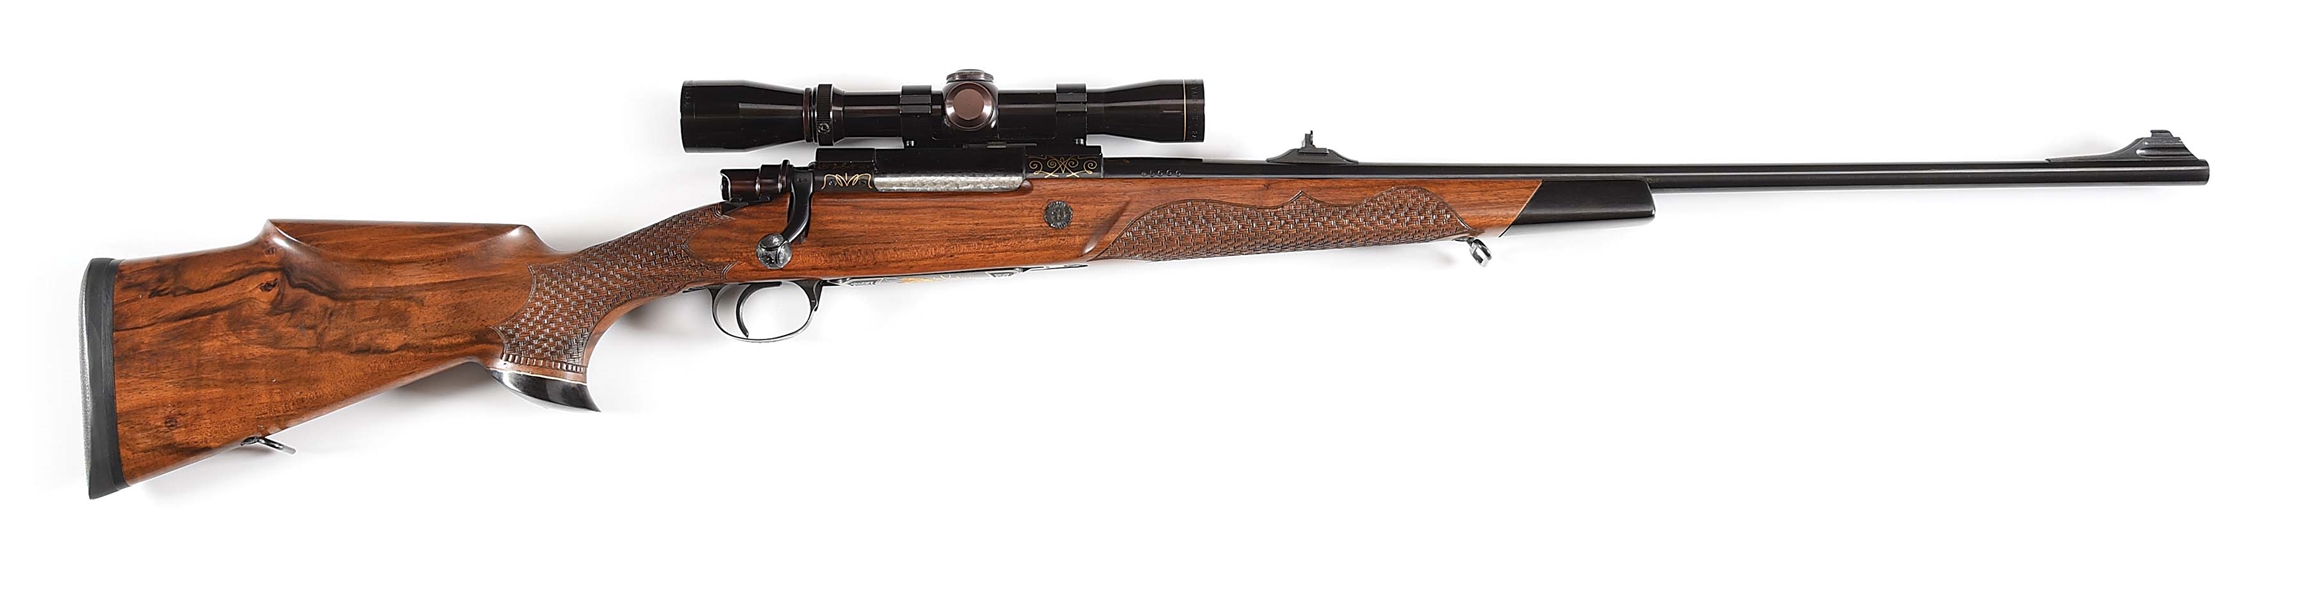 (M) PACHMAYR CUSTOM FN MAUSER BOLT ACTION RIFLE IN .308 NORMA MAGNUM.